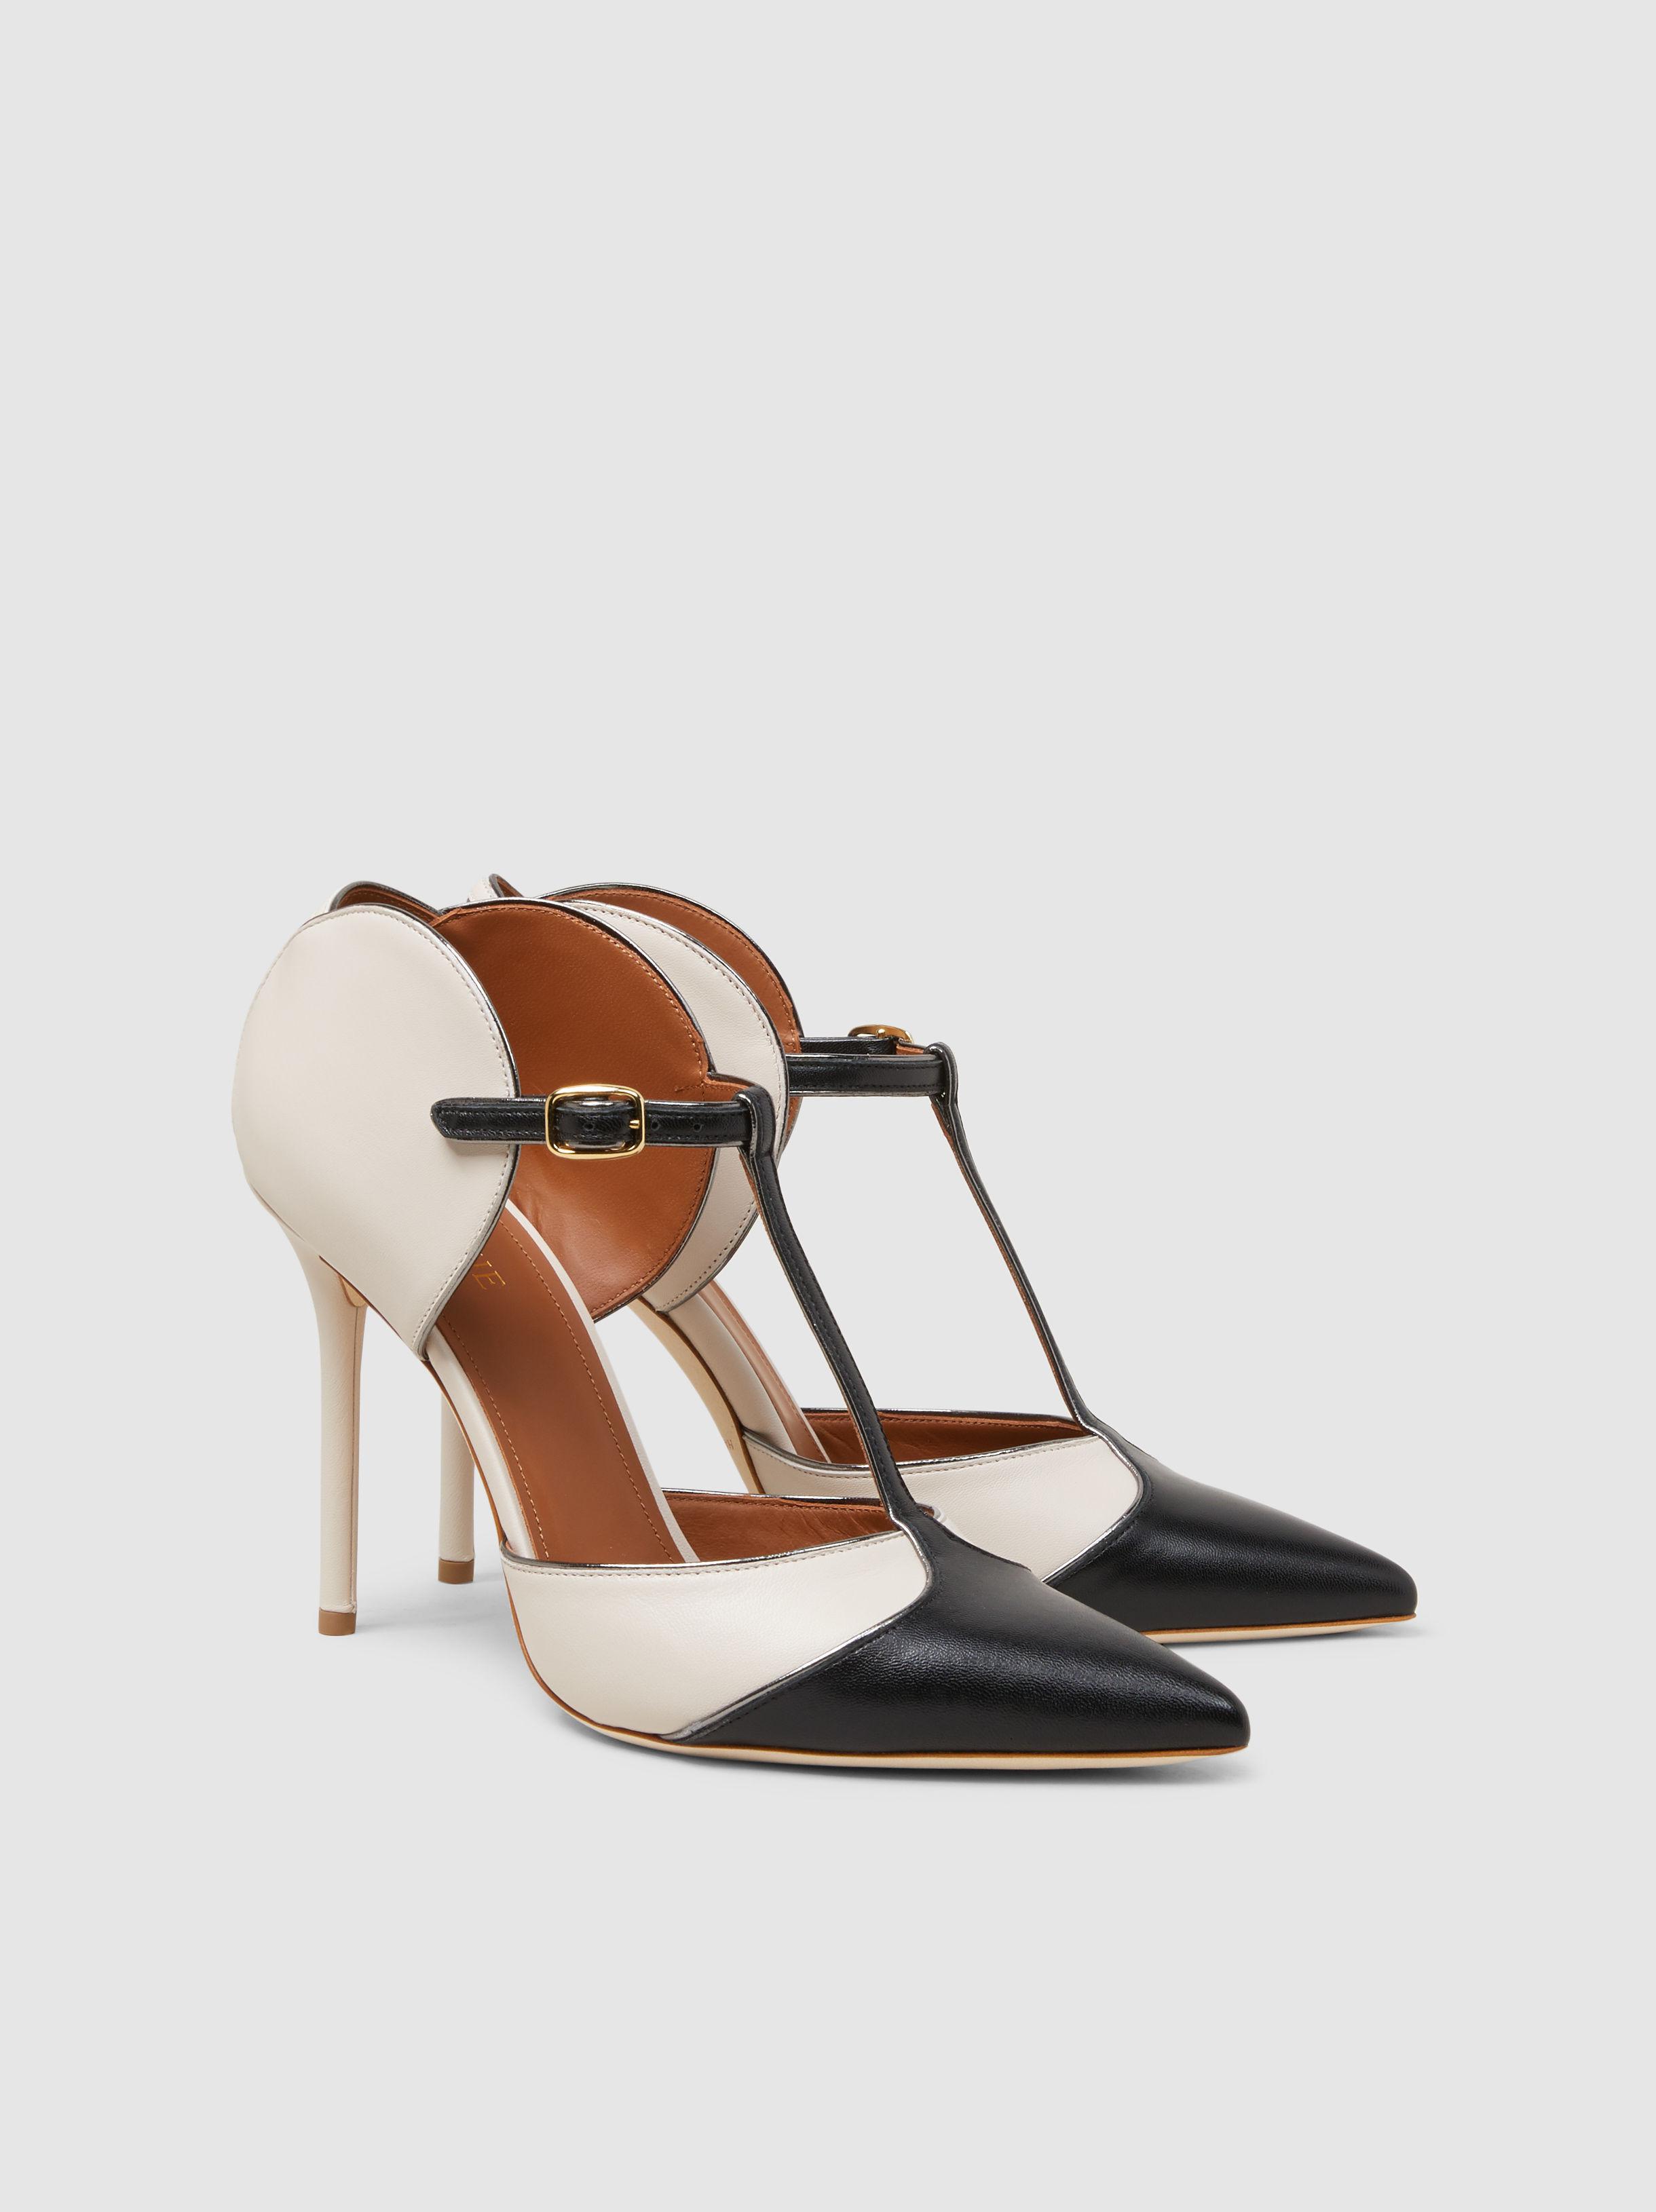 Lyst - Malone Souliers Imogen Two-tone Leather Pumps in Black